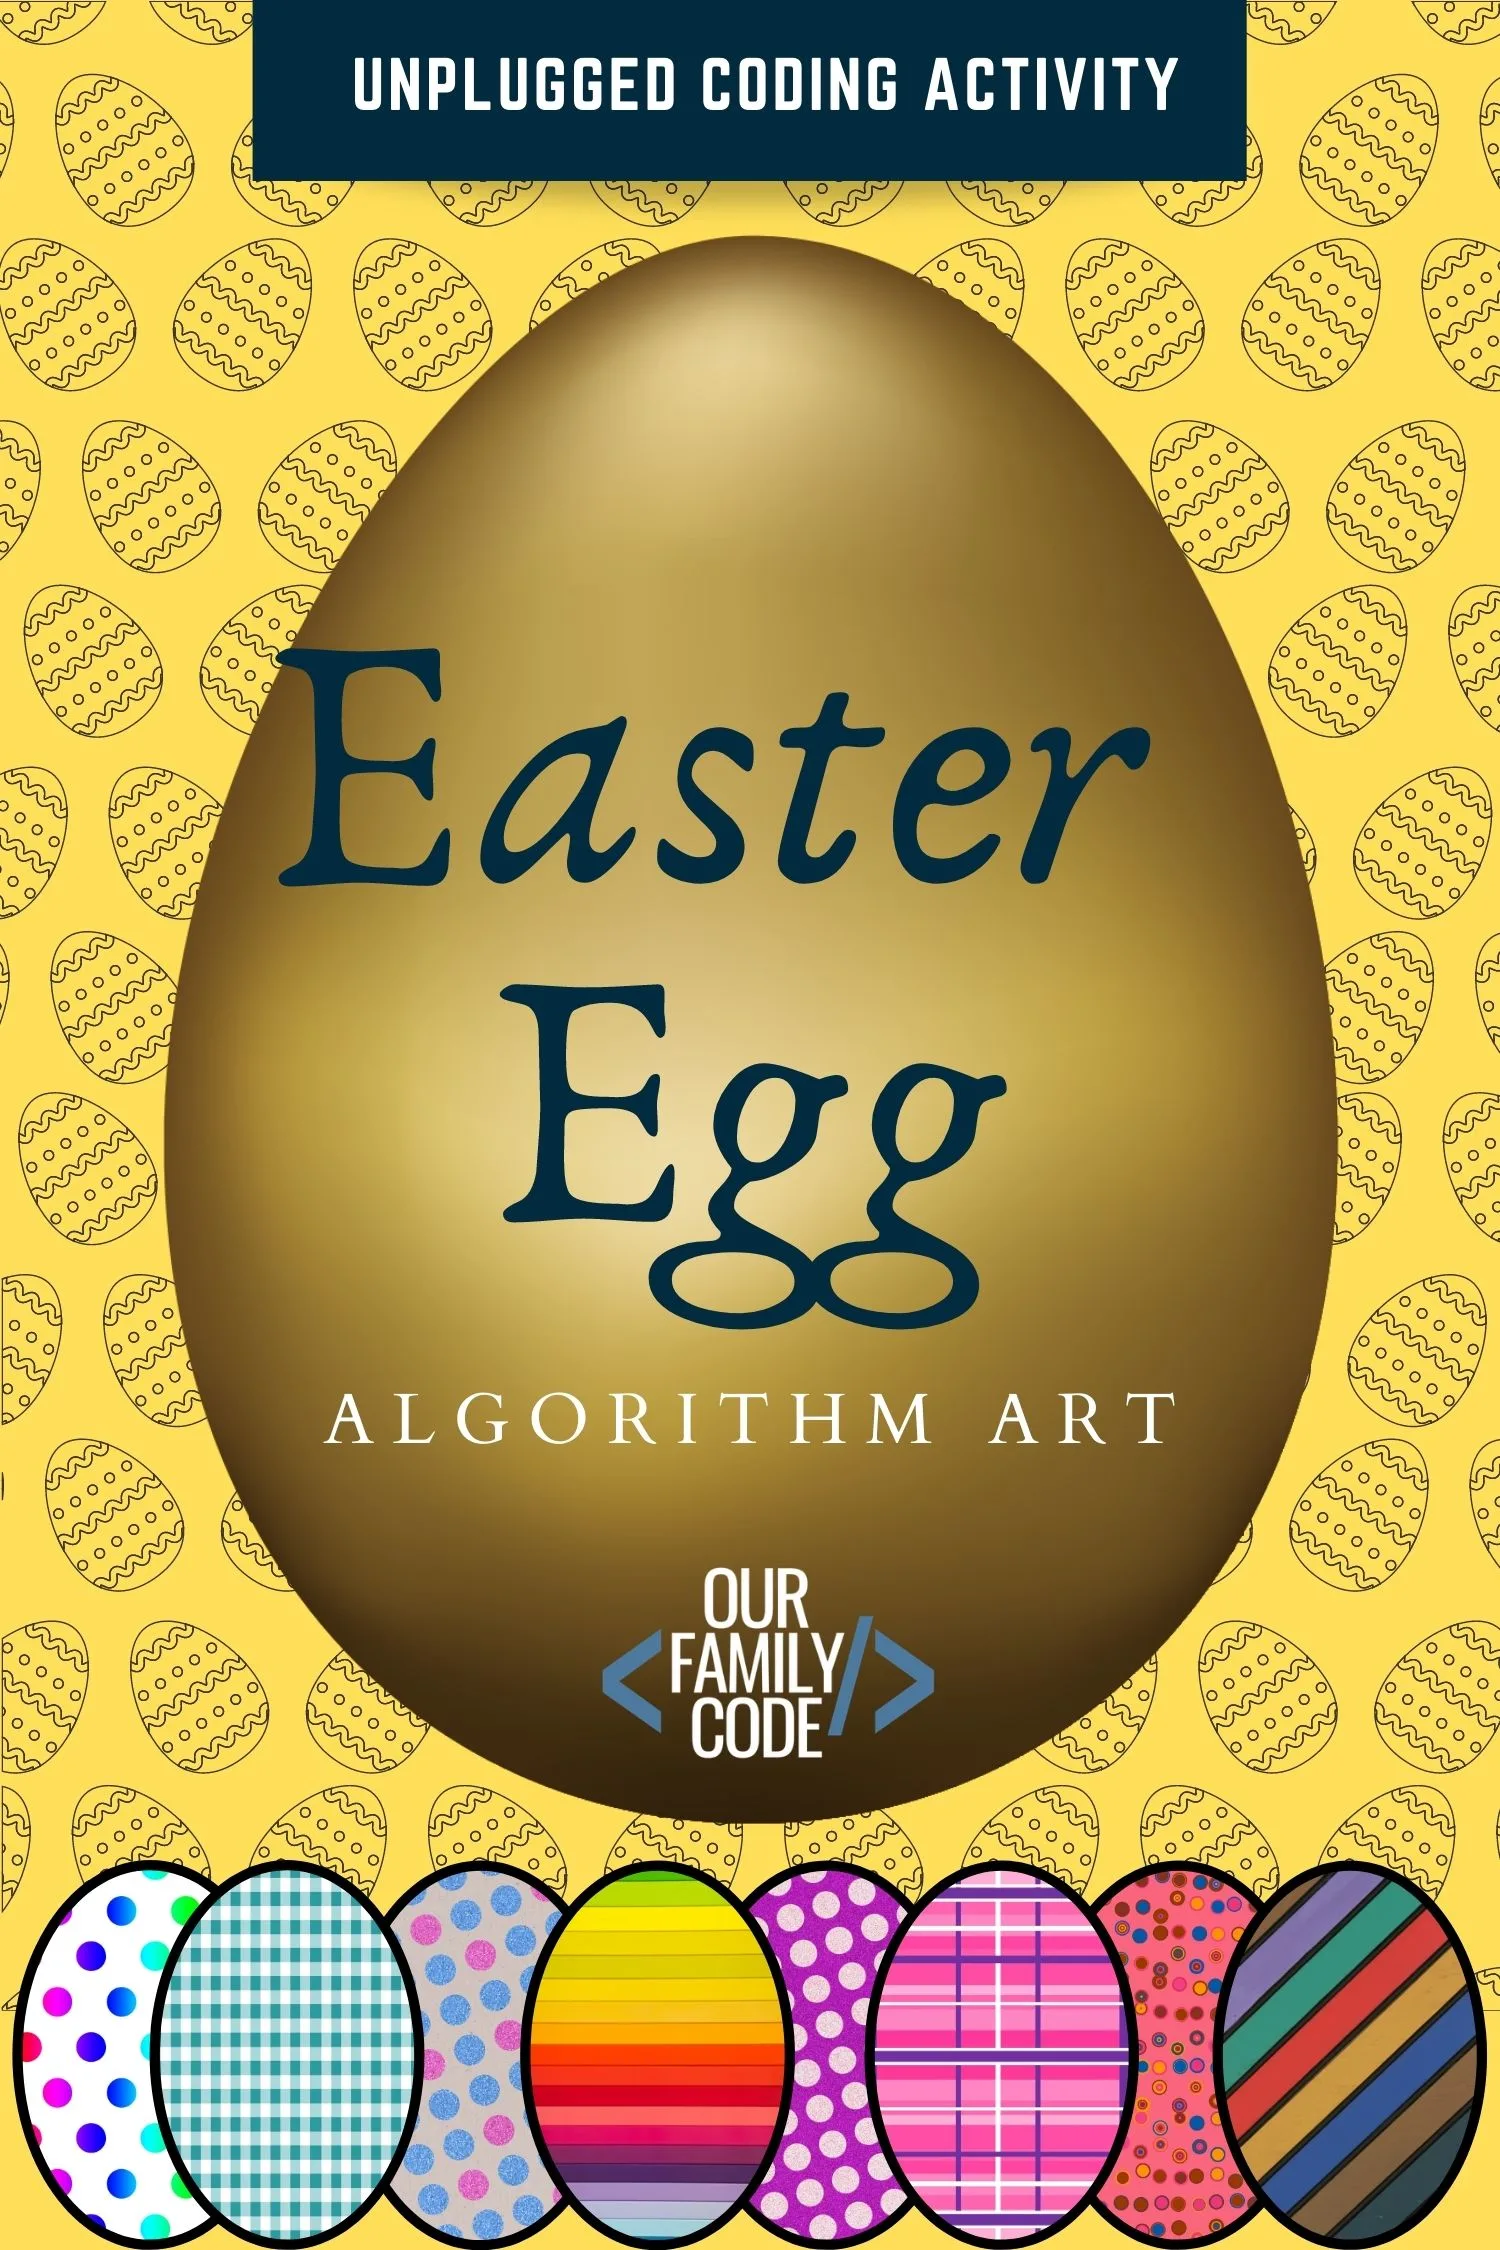 A picture of a golden egg with the text "Easter Egg Algorithm Art" printed on it.